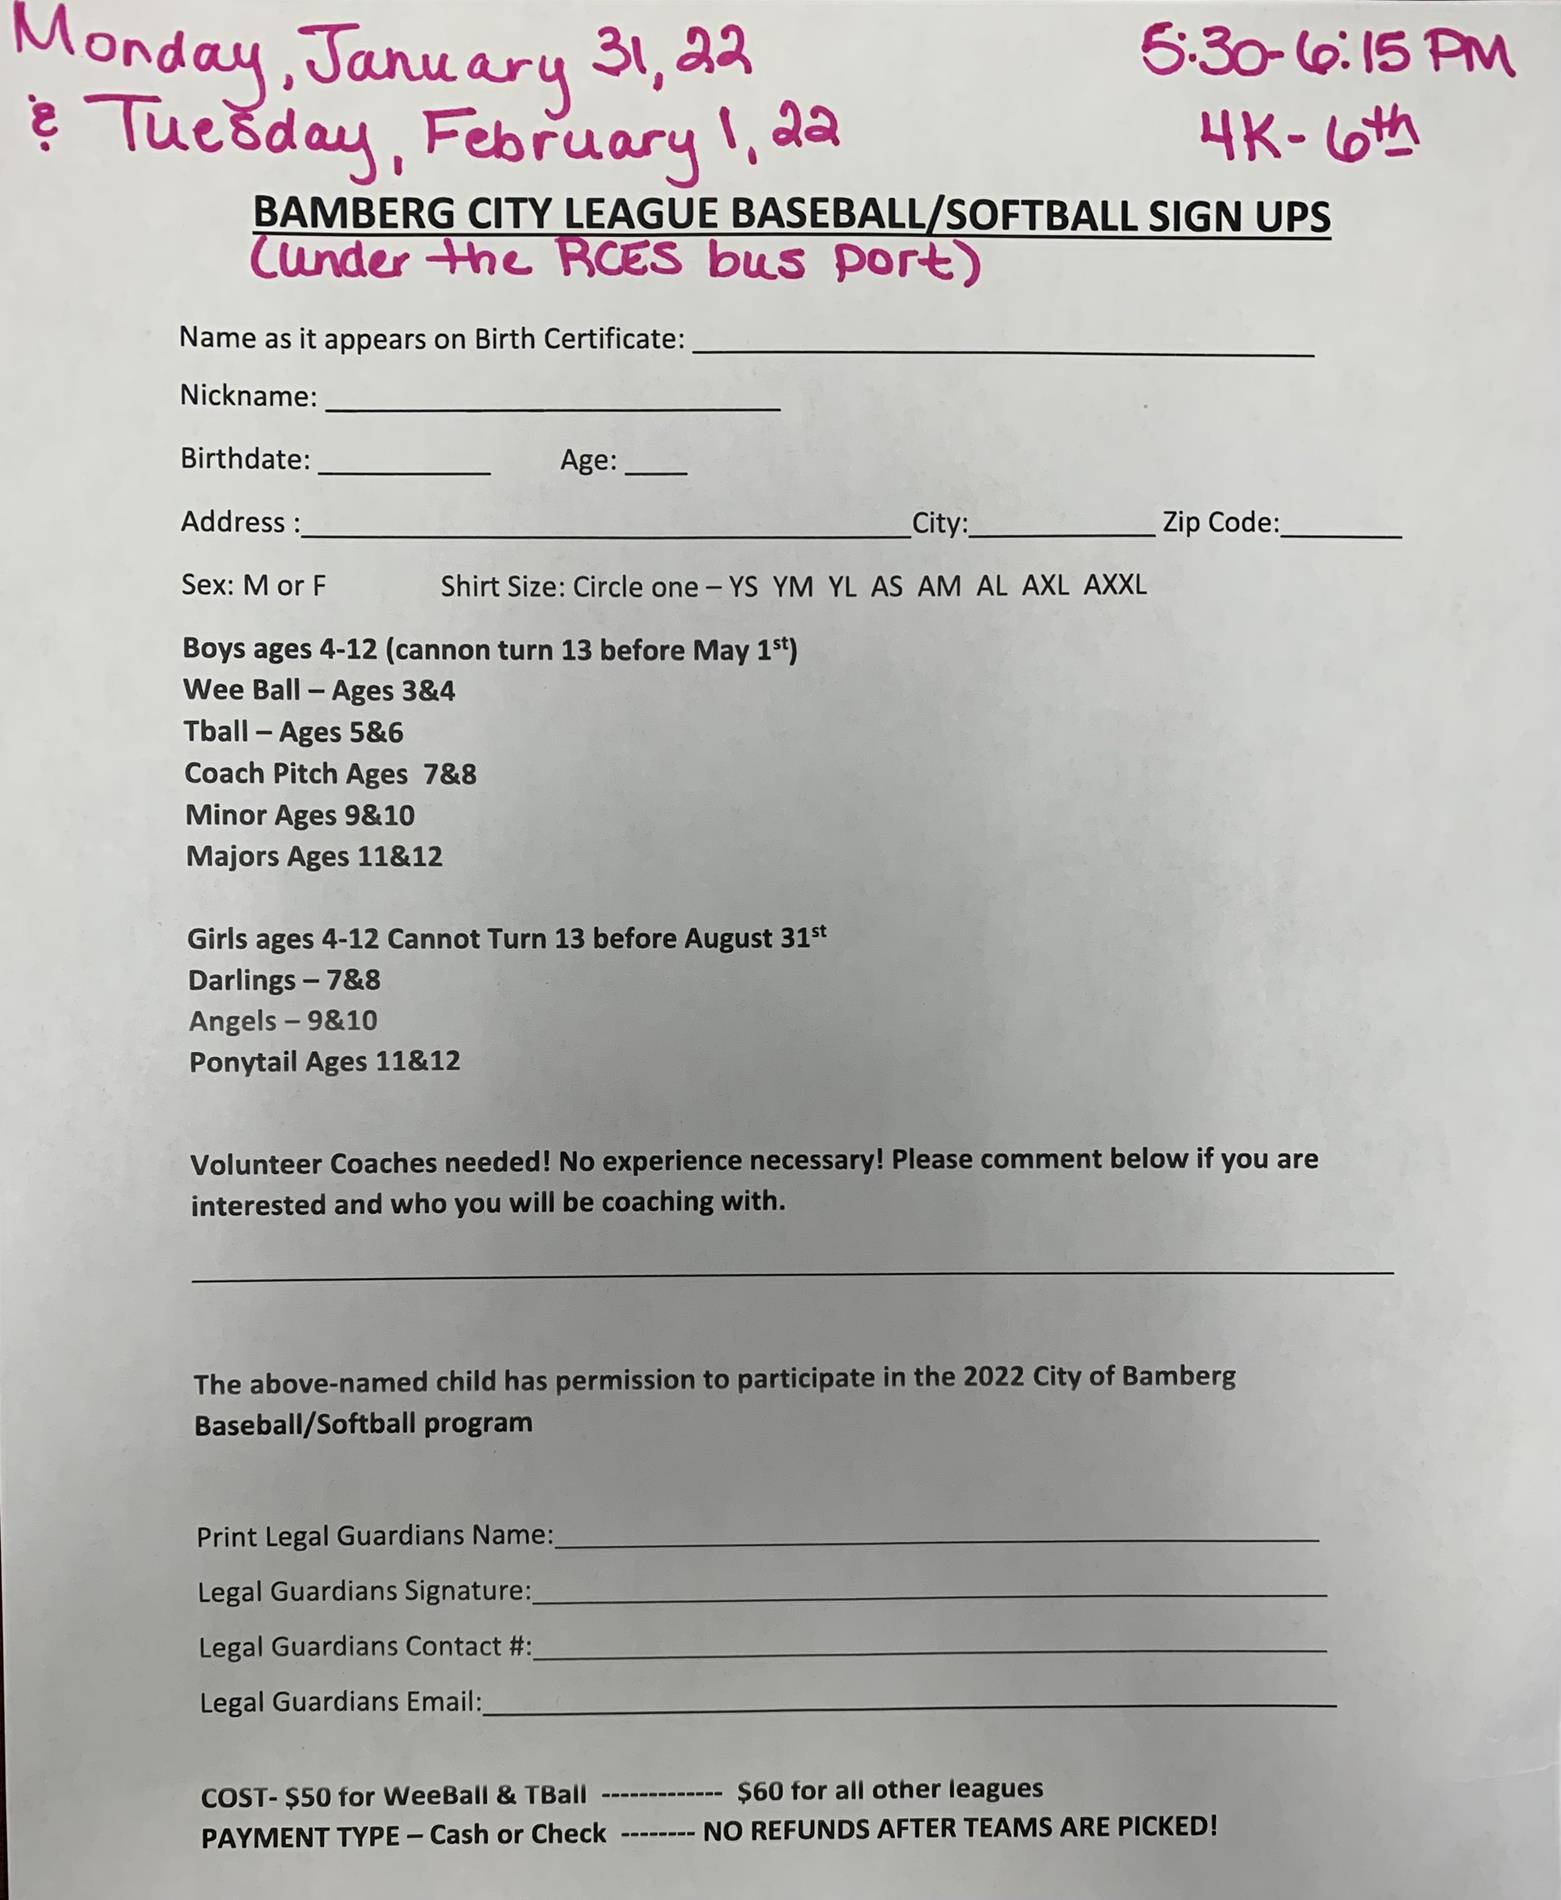 Bamberg City League Baseball/Softball Sign-Ups Registration will take place on Monday, January, 31, 2022 and Tuesday, February 1, 2022 from 5:30-6:15 PM under the RCES bus port Please complete the registration form with the following information: Name as it appears on Birth Certificate Nickname Birthdate Age Address City  State  Zip Code Sex Shirt Size Volunteer Coaches are needed!  Not experience necessary! Please comment if you are interested and who you will be coaching with. Print & Sign Guardians Name stating that the child has your permission to participate in the 2022 City of Bamberg Baseball/Softball Program. Cost - $50 for Weeball & TeeBall; $60 for all other leagues Payment Type - Cash or Check No refunds after teams are picked